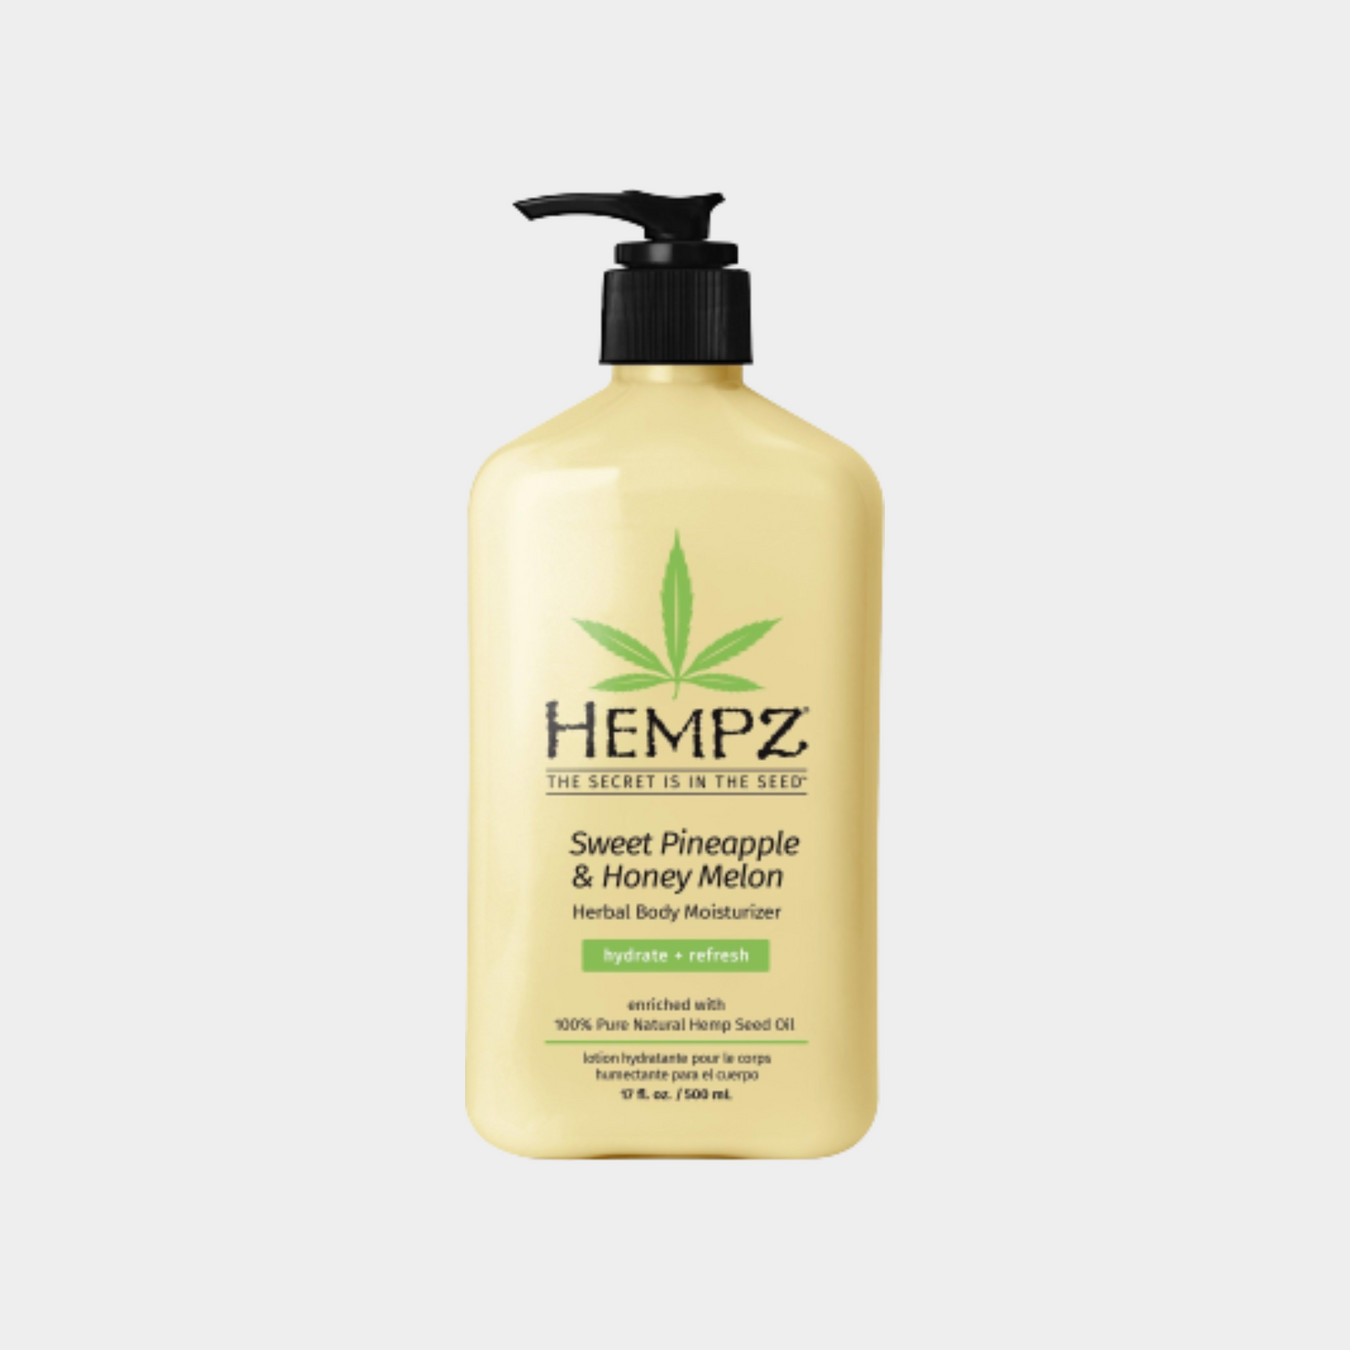 Shop Canada's best selection of hemp beauty products on Jupiter Grass.